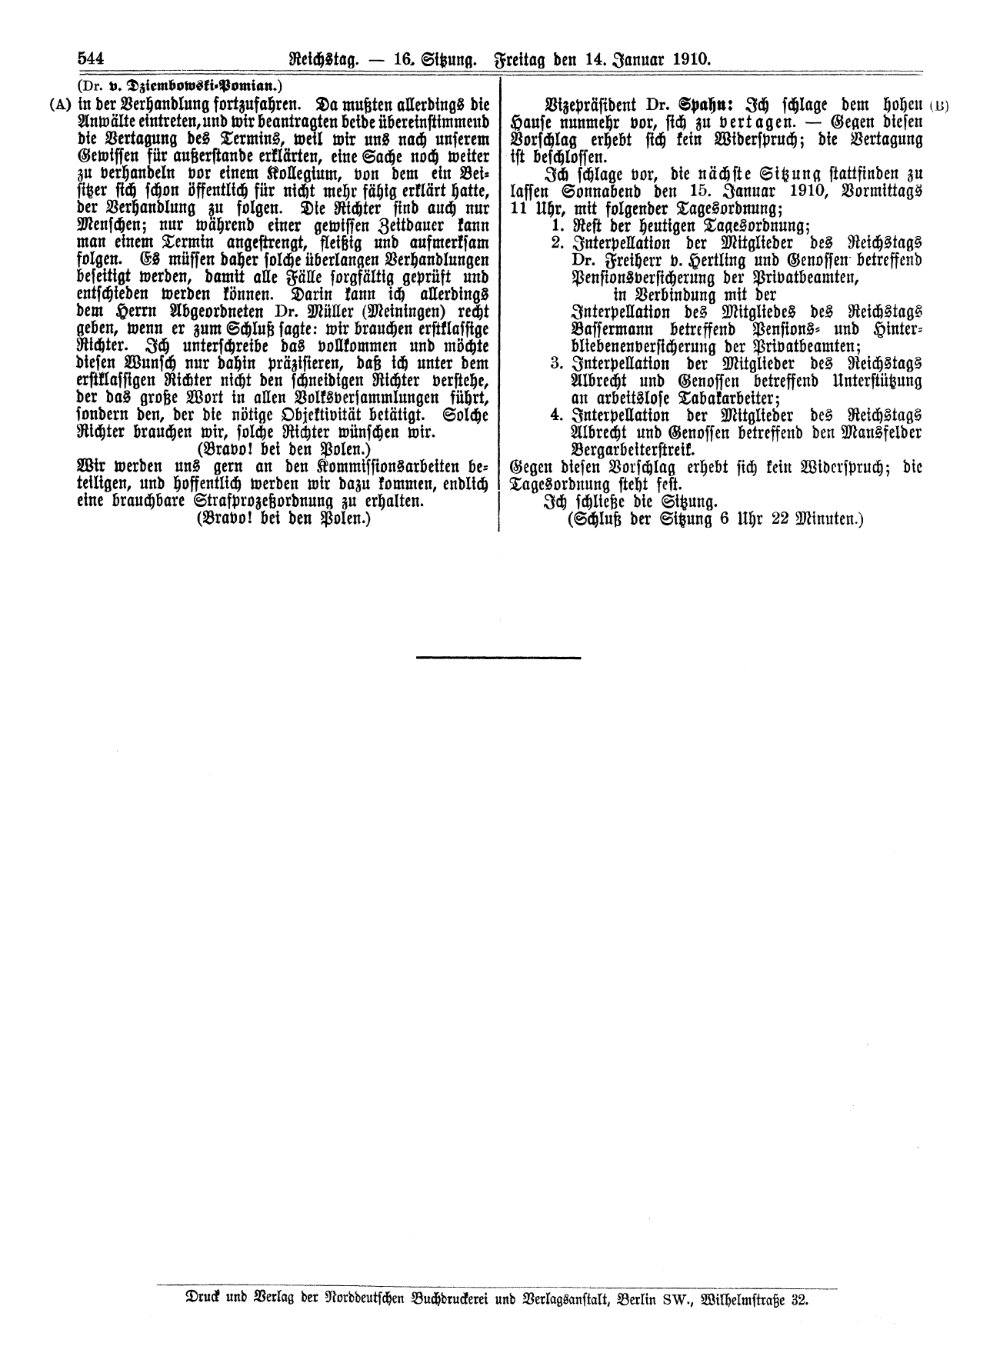 Scan of page 544